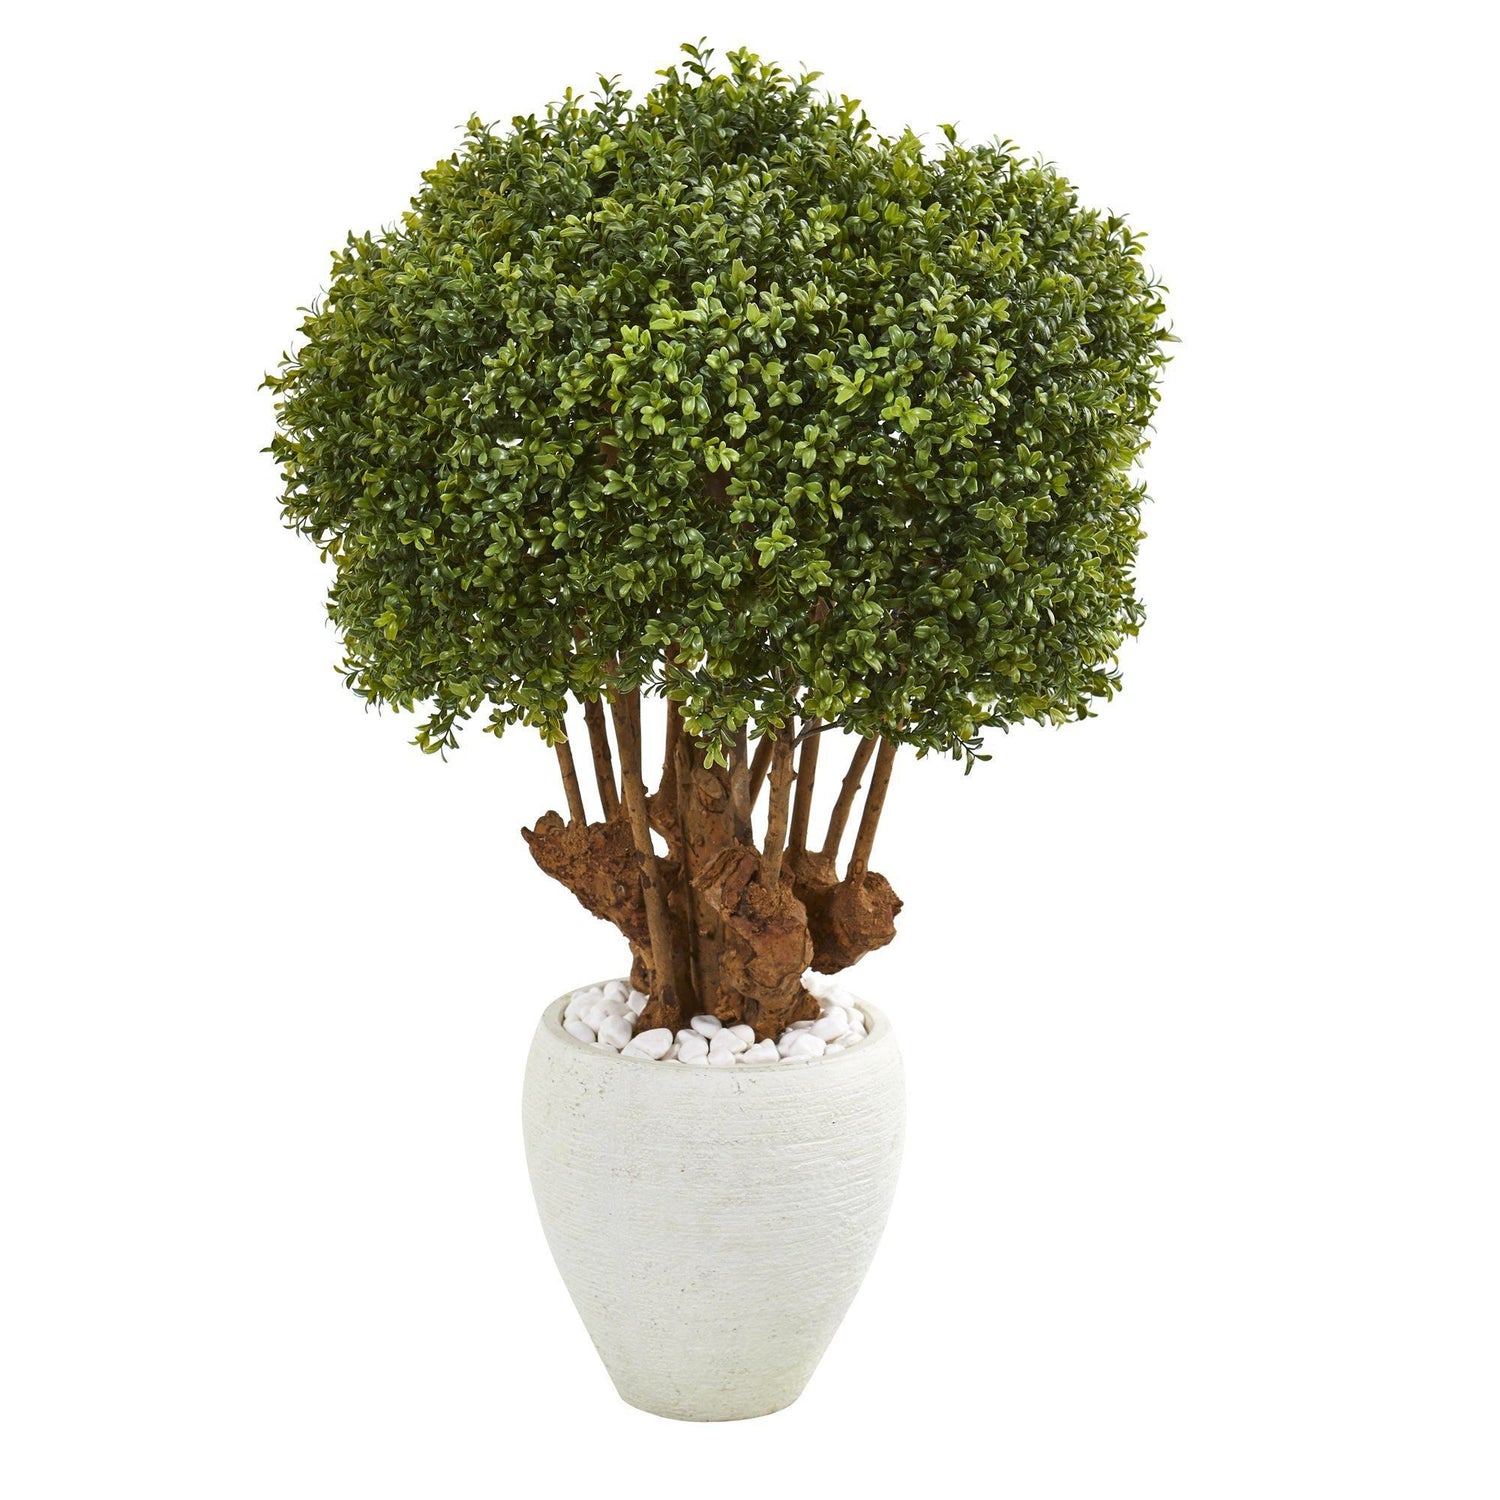 41” Boxwood Artificial Topiary Tree in White Planter (Indoor/Outdoor)